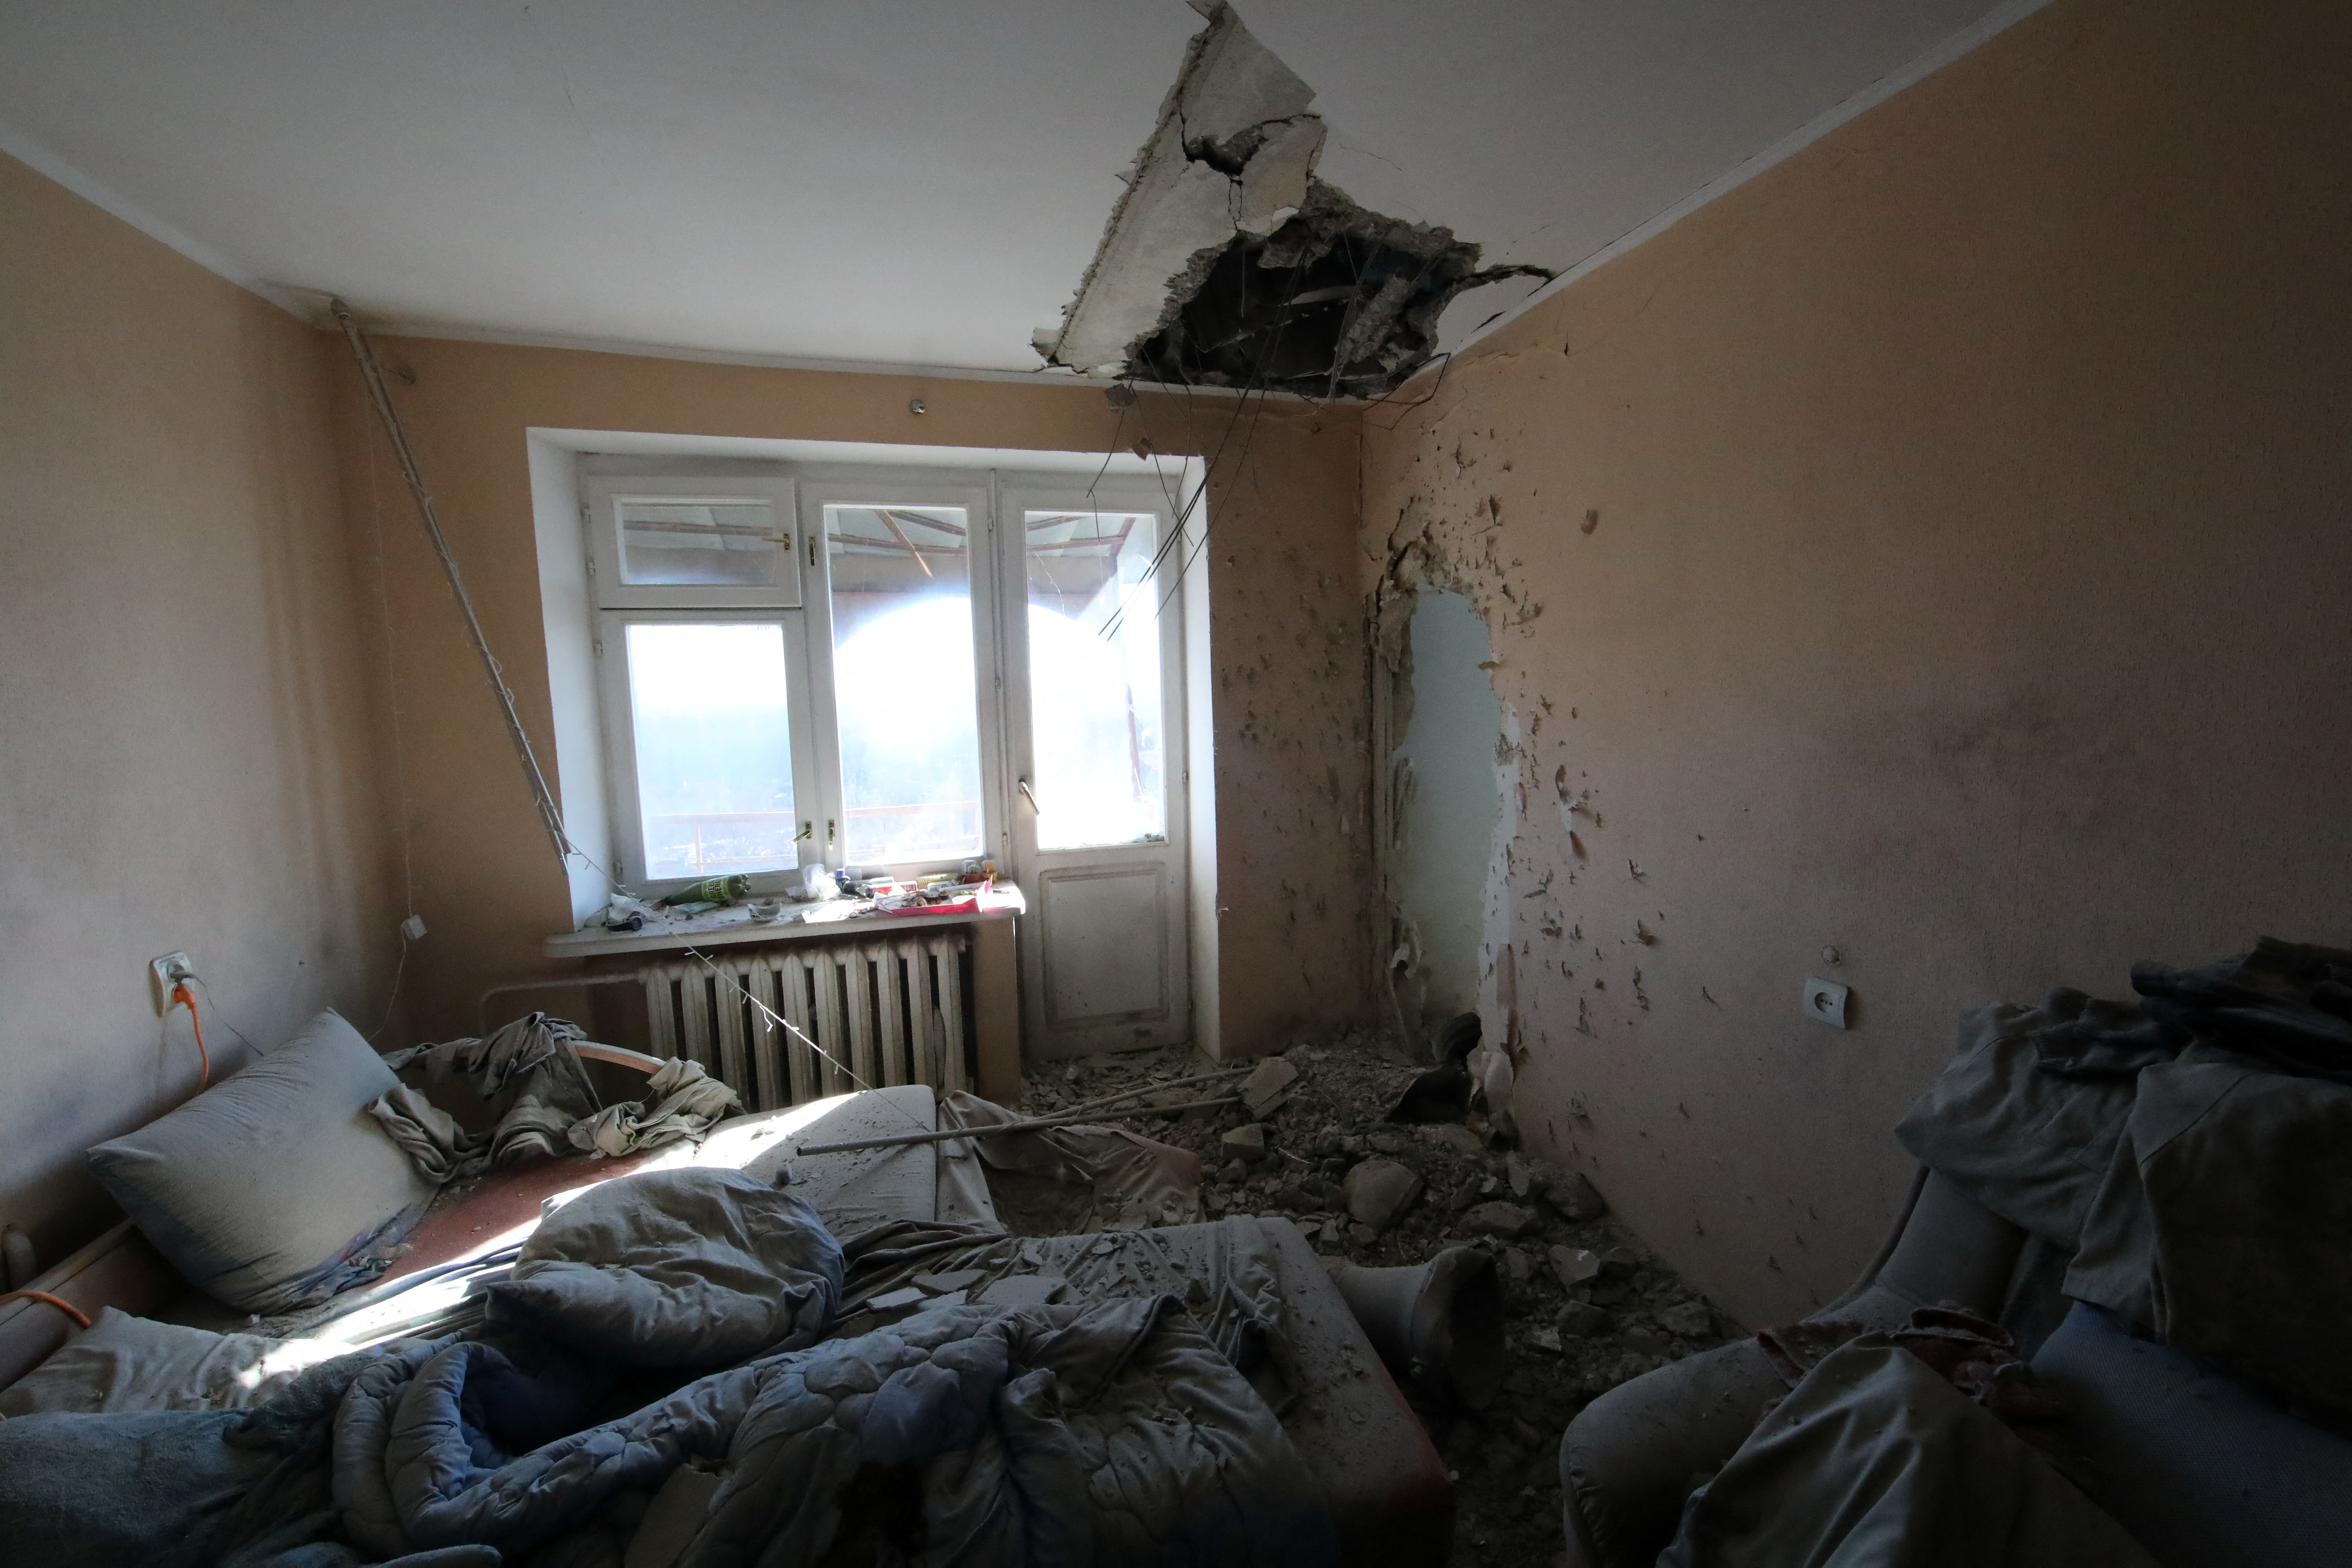 Apartment building interior view shows aftermath of shelling in Kharkiv